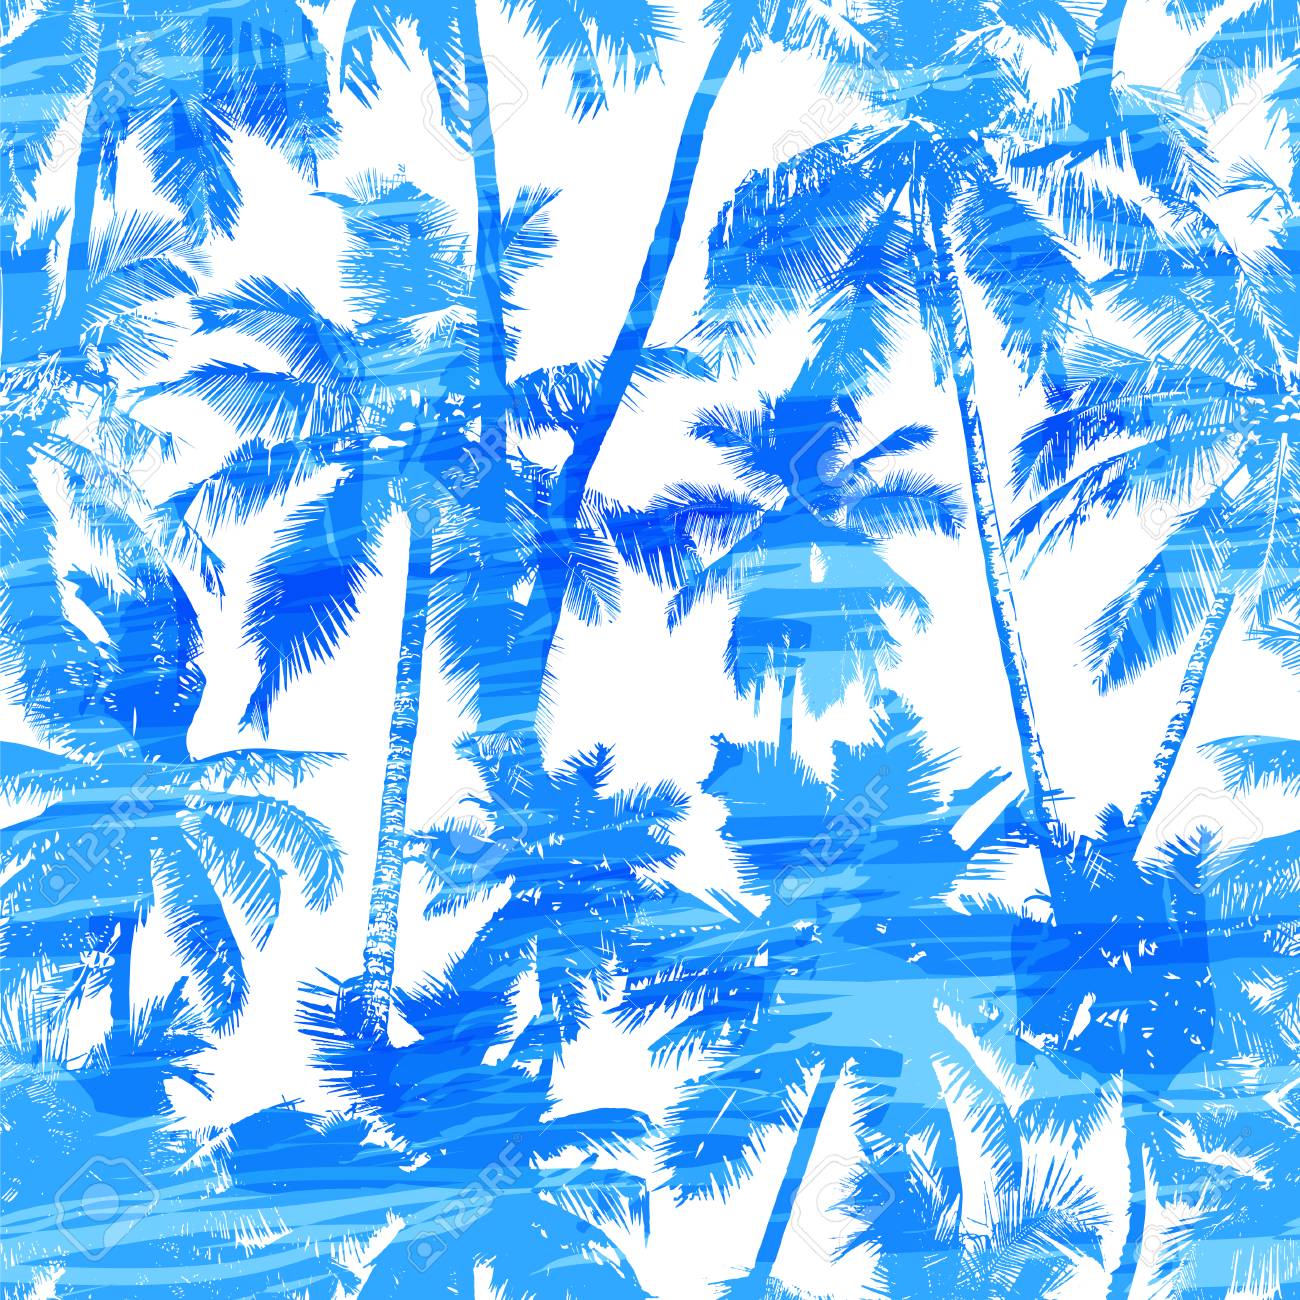 Tropical Background Seamless Pattern Of Blue Coconut Palms On